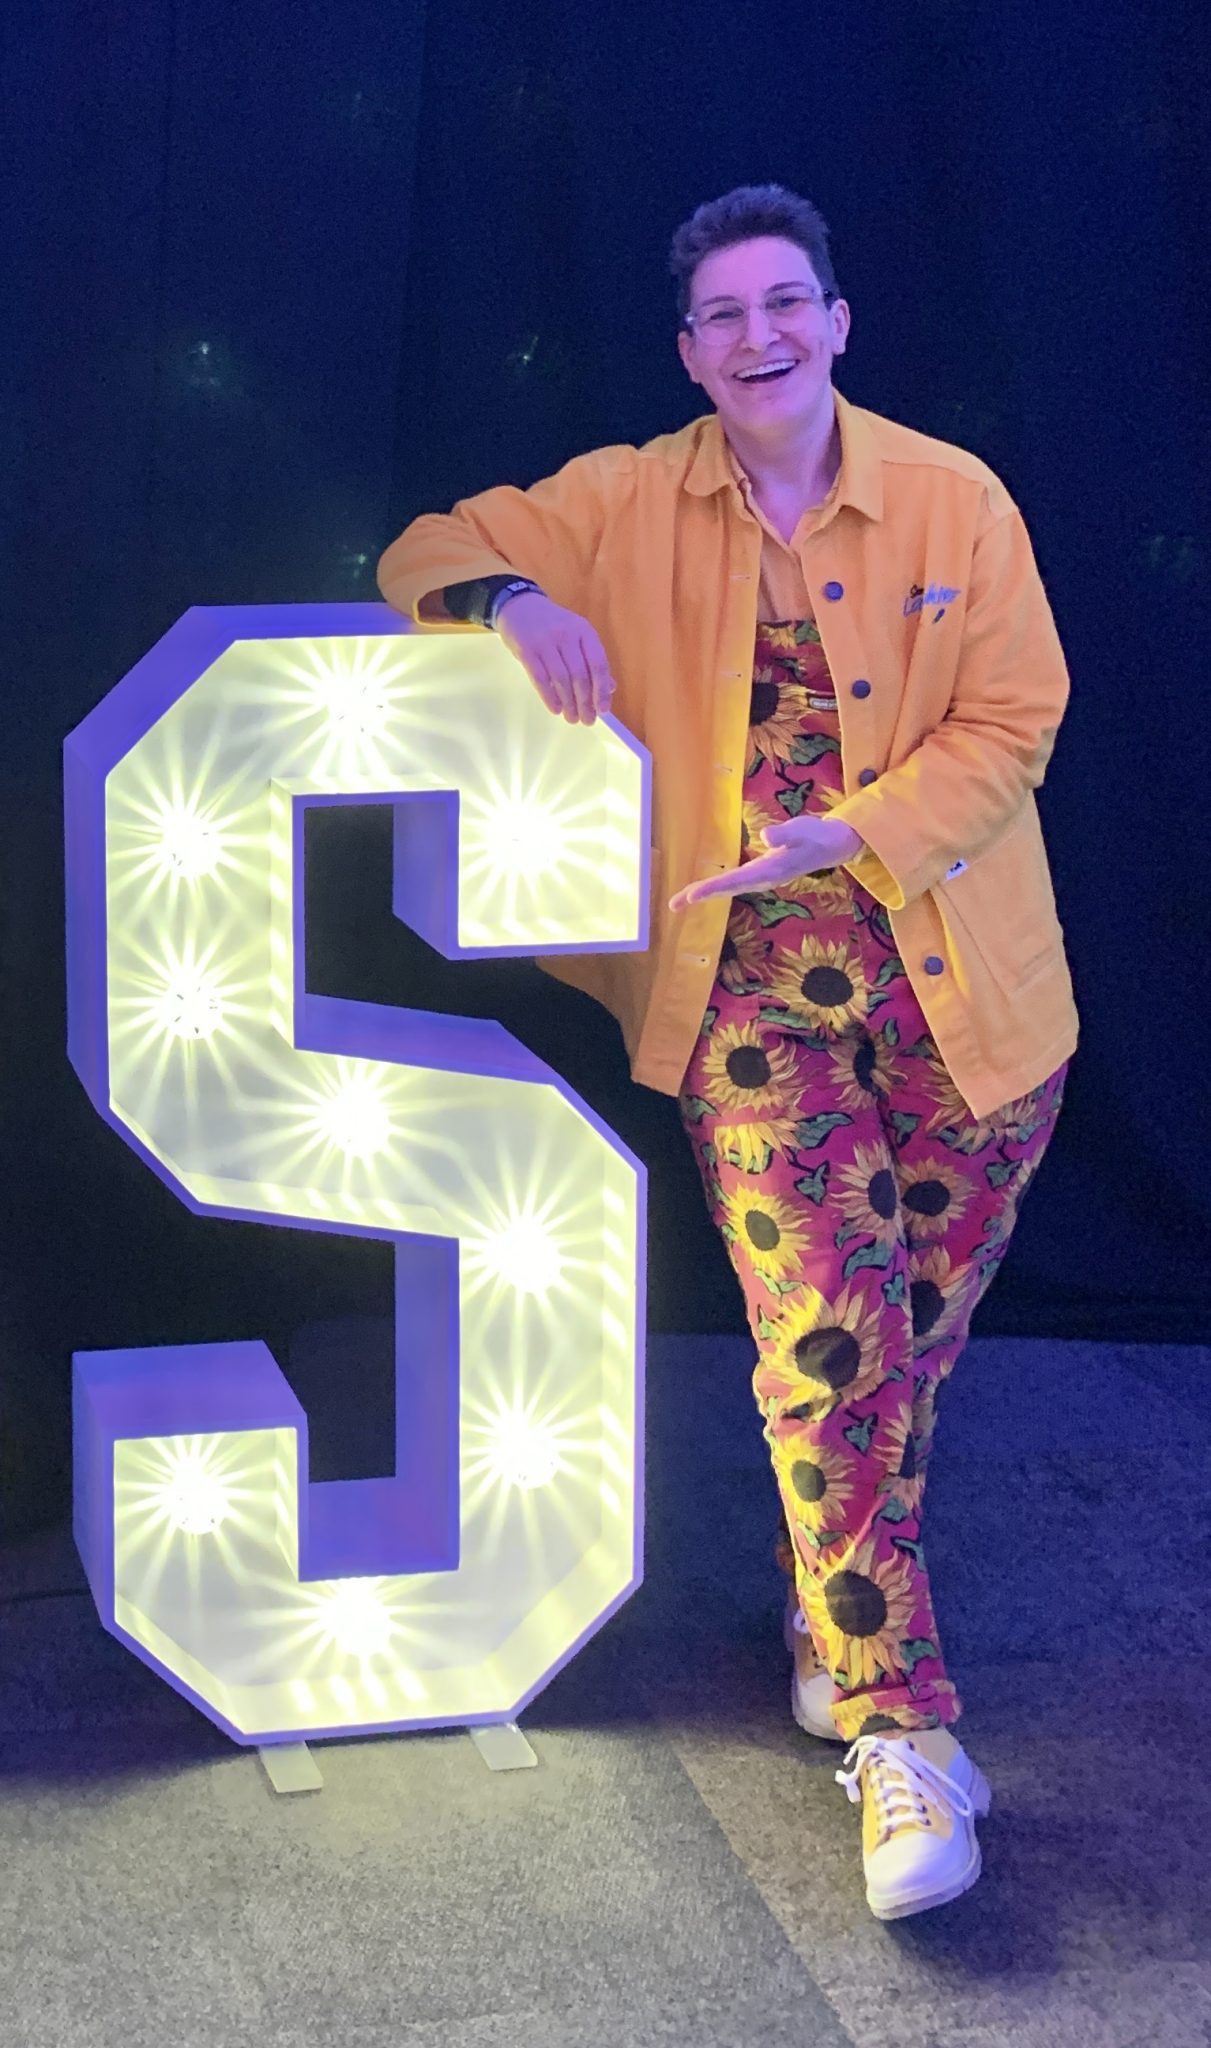 Sara Kay woman with sunflower dungarees and yellow jacket next to an illuminated letter S